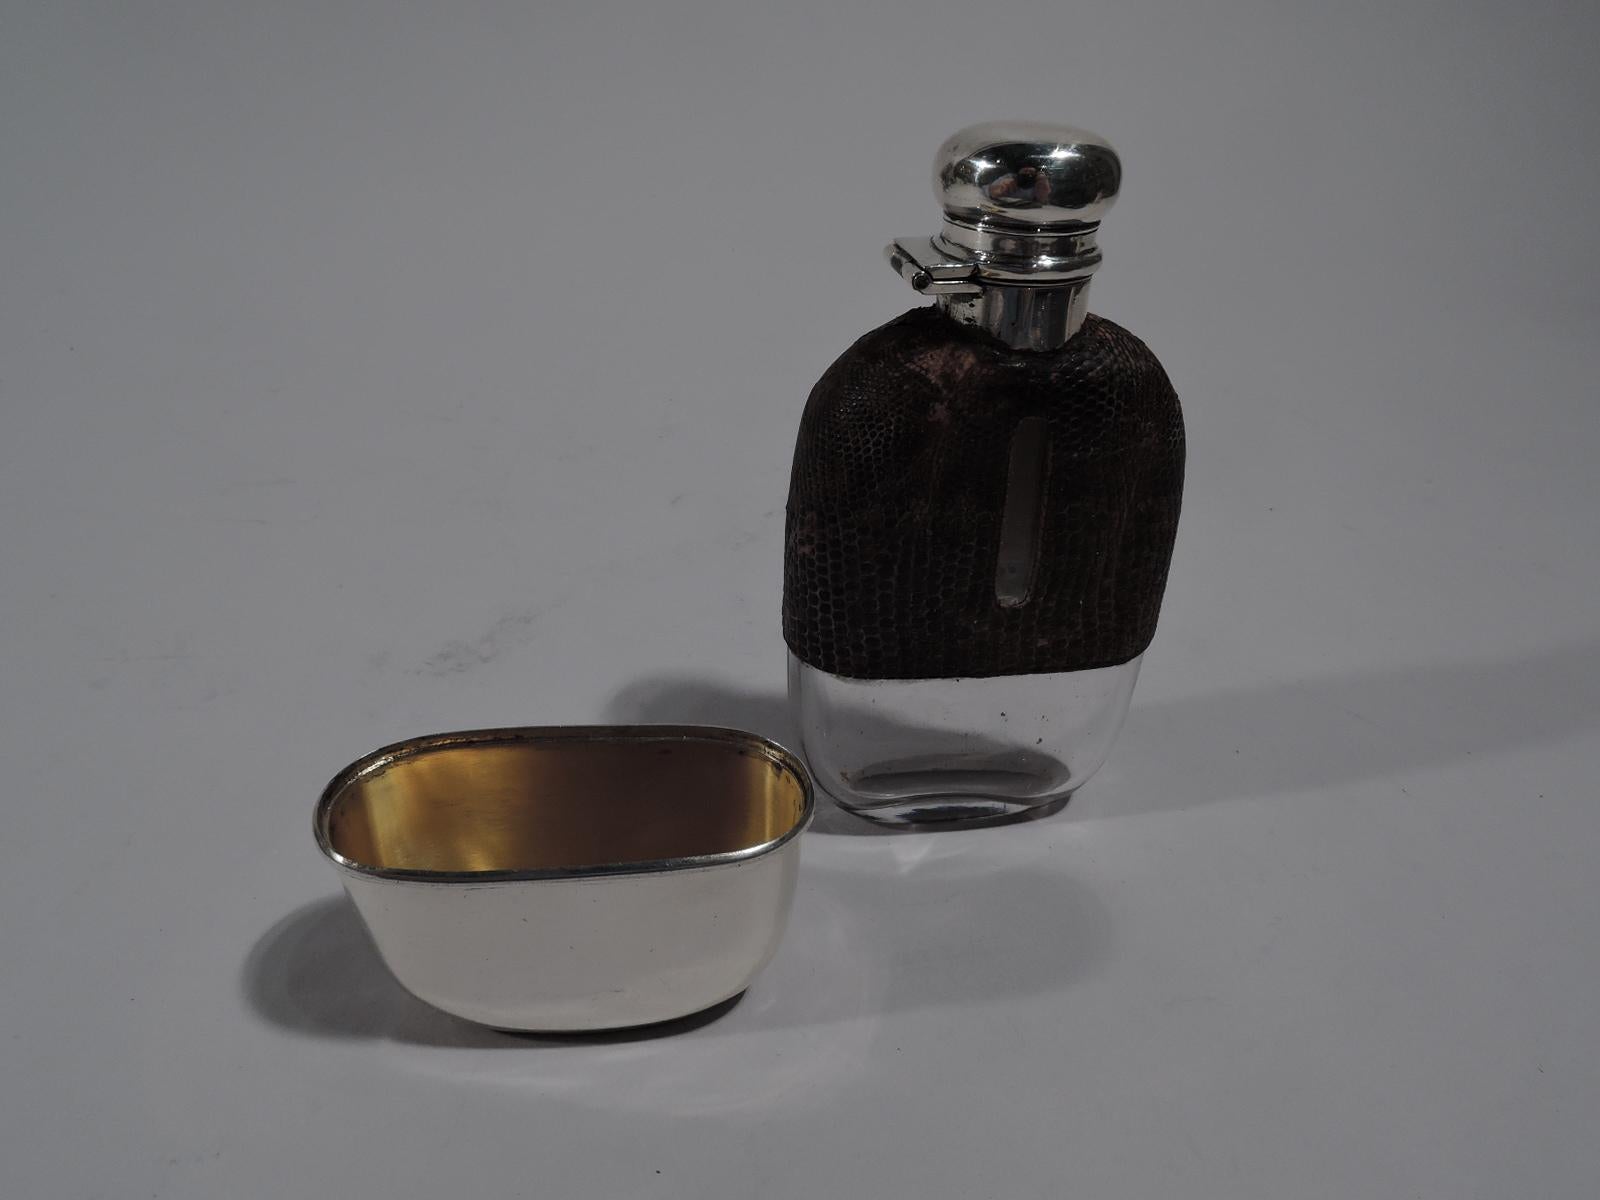 American Edwardian sterling silver safari flask, circa 1910. Clear glass with sterling silver neck and hinged and cork-lined cover. Top half covered with leather. Bottom half has detachable sterling silver cup. Ladies medicinal size. Holds the daily